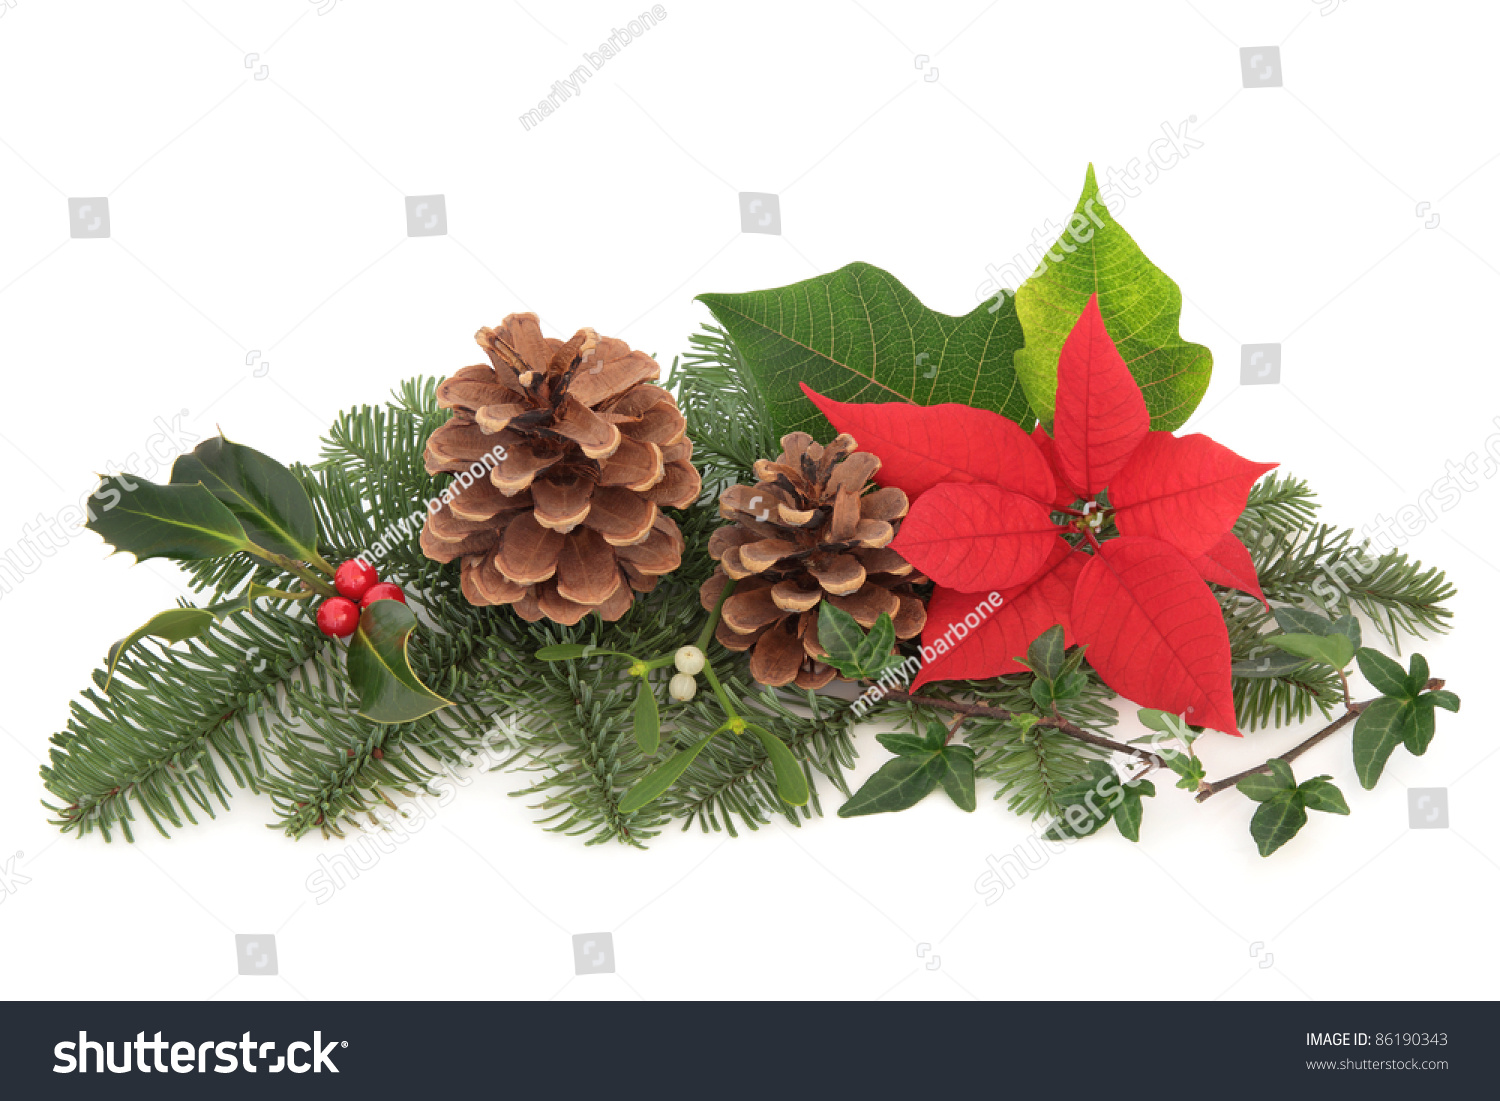 Christmas Decoration Of Mistletoe, Holly With Berries, Poinsettia ...